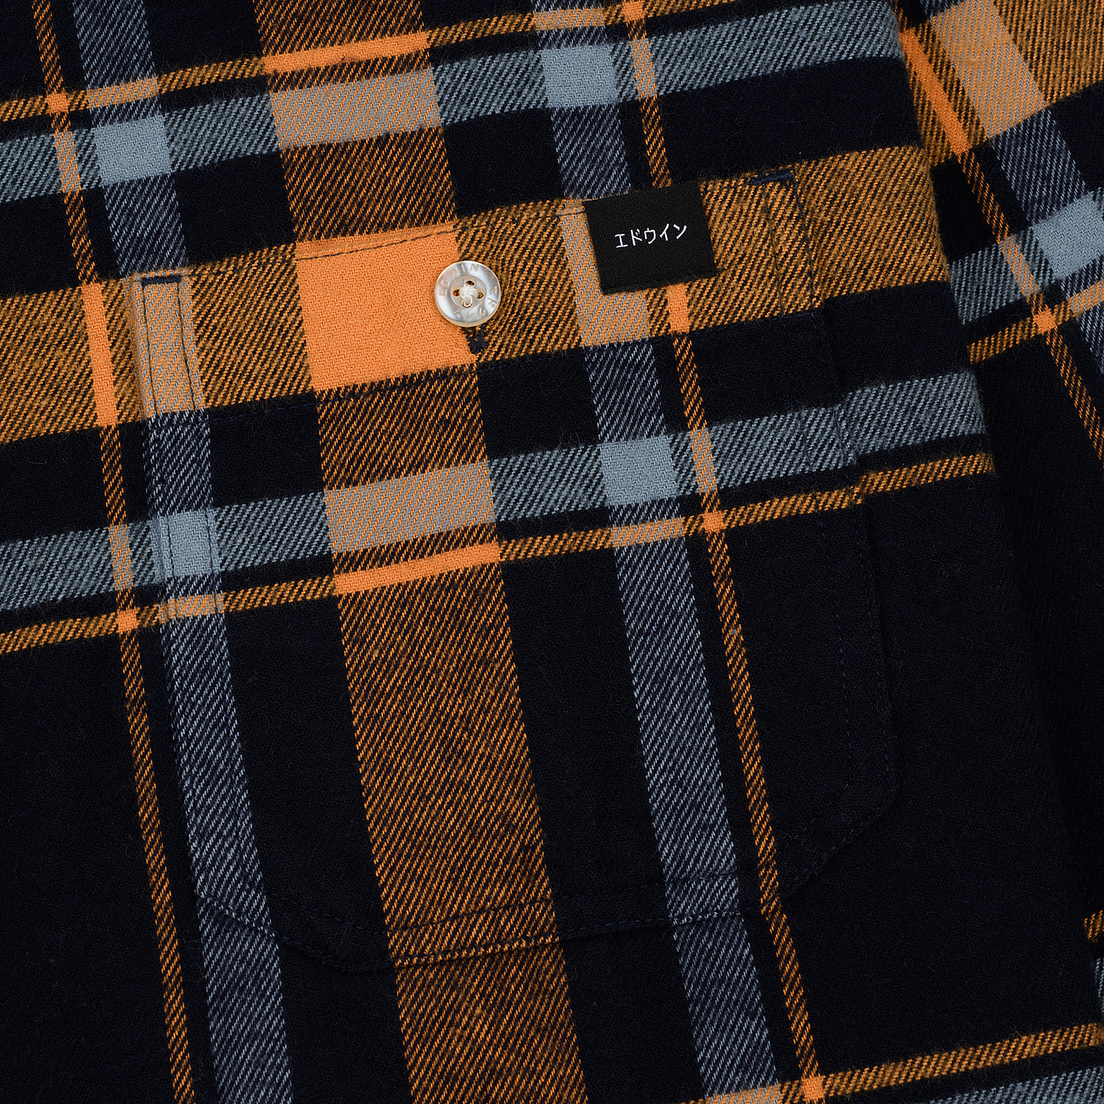 Edwin Мужская рубашка Labour Mid Twill Flannel Cotton Brushed